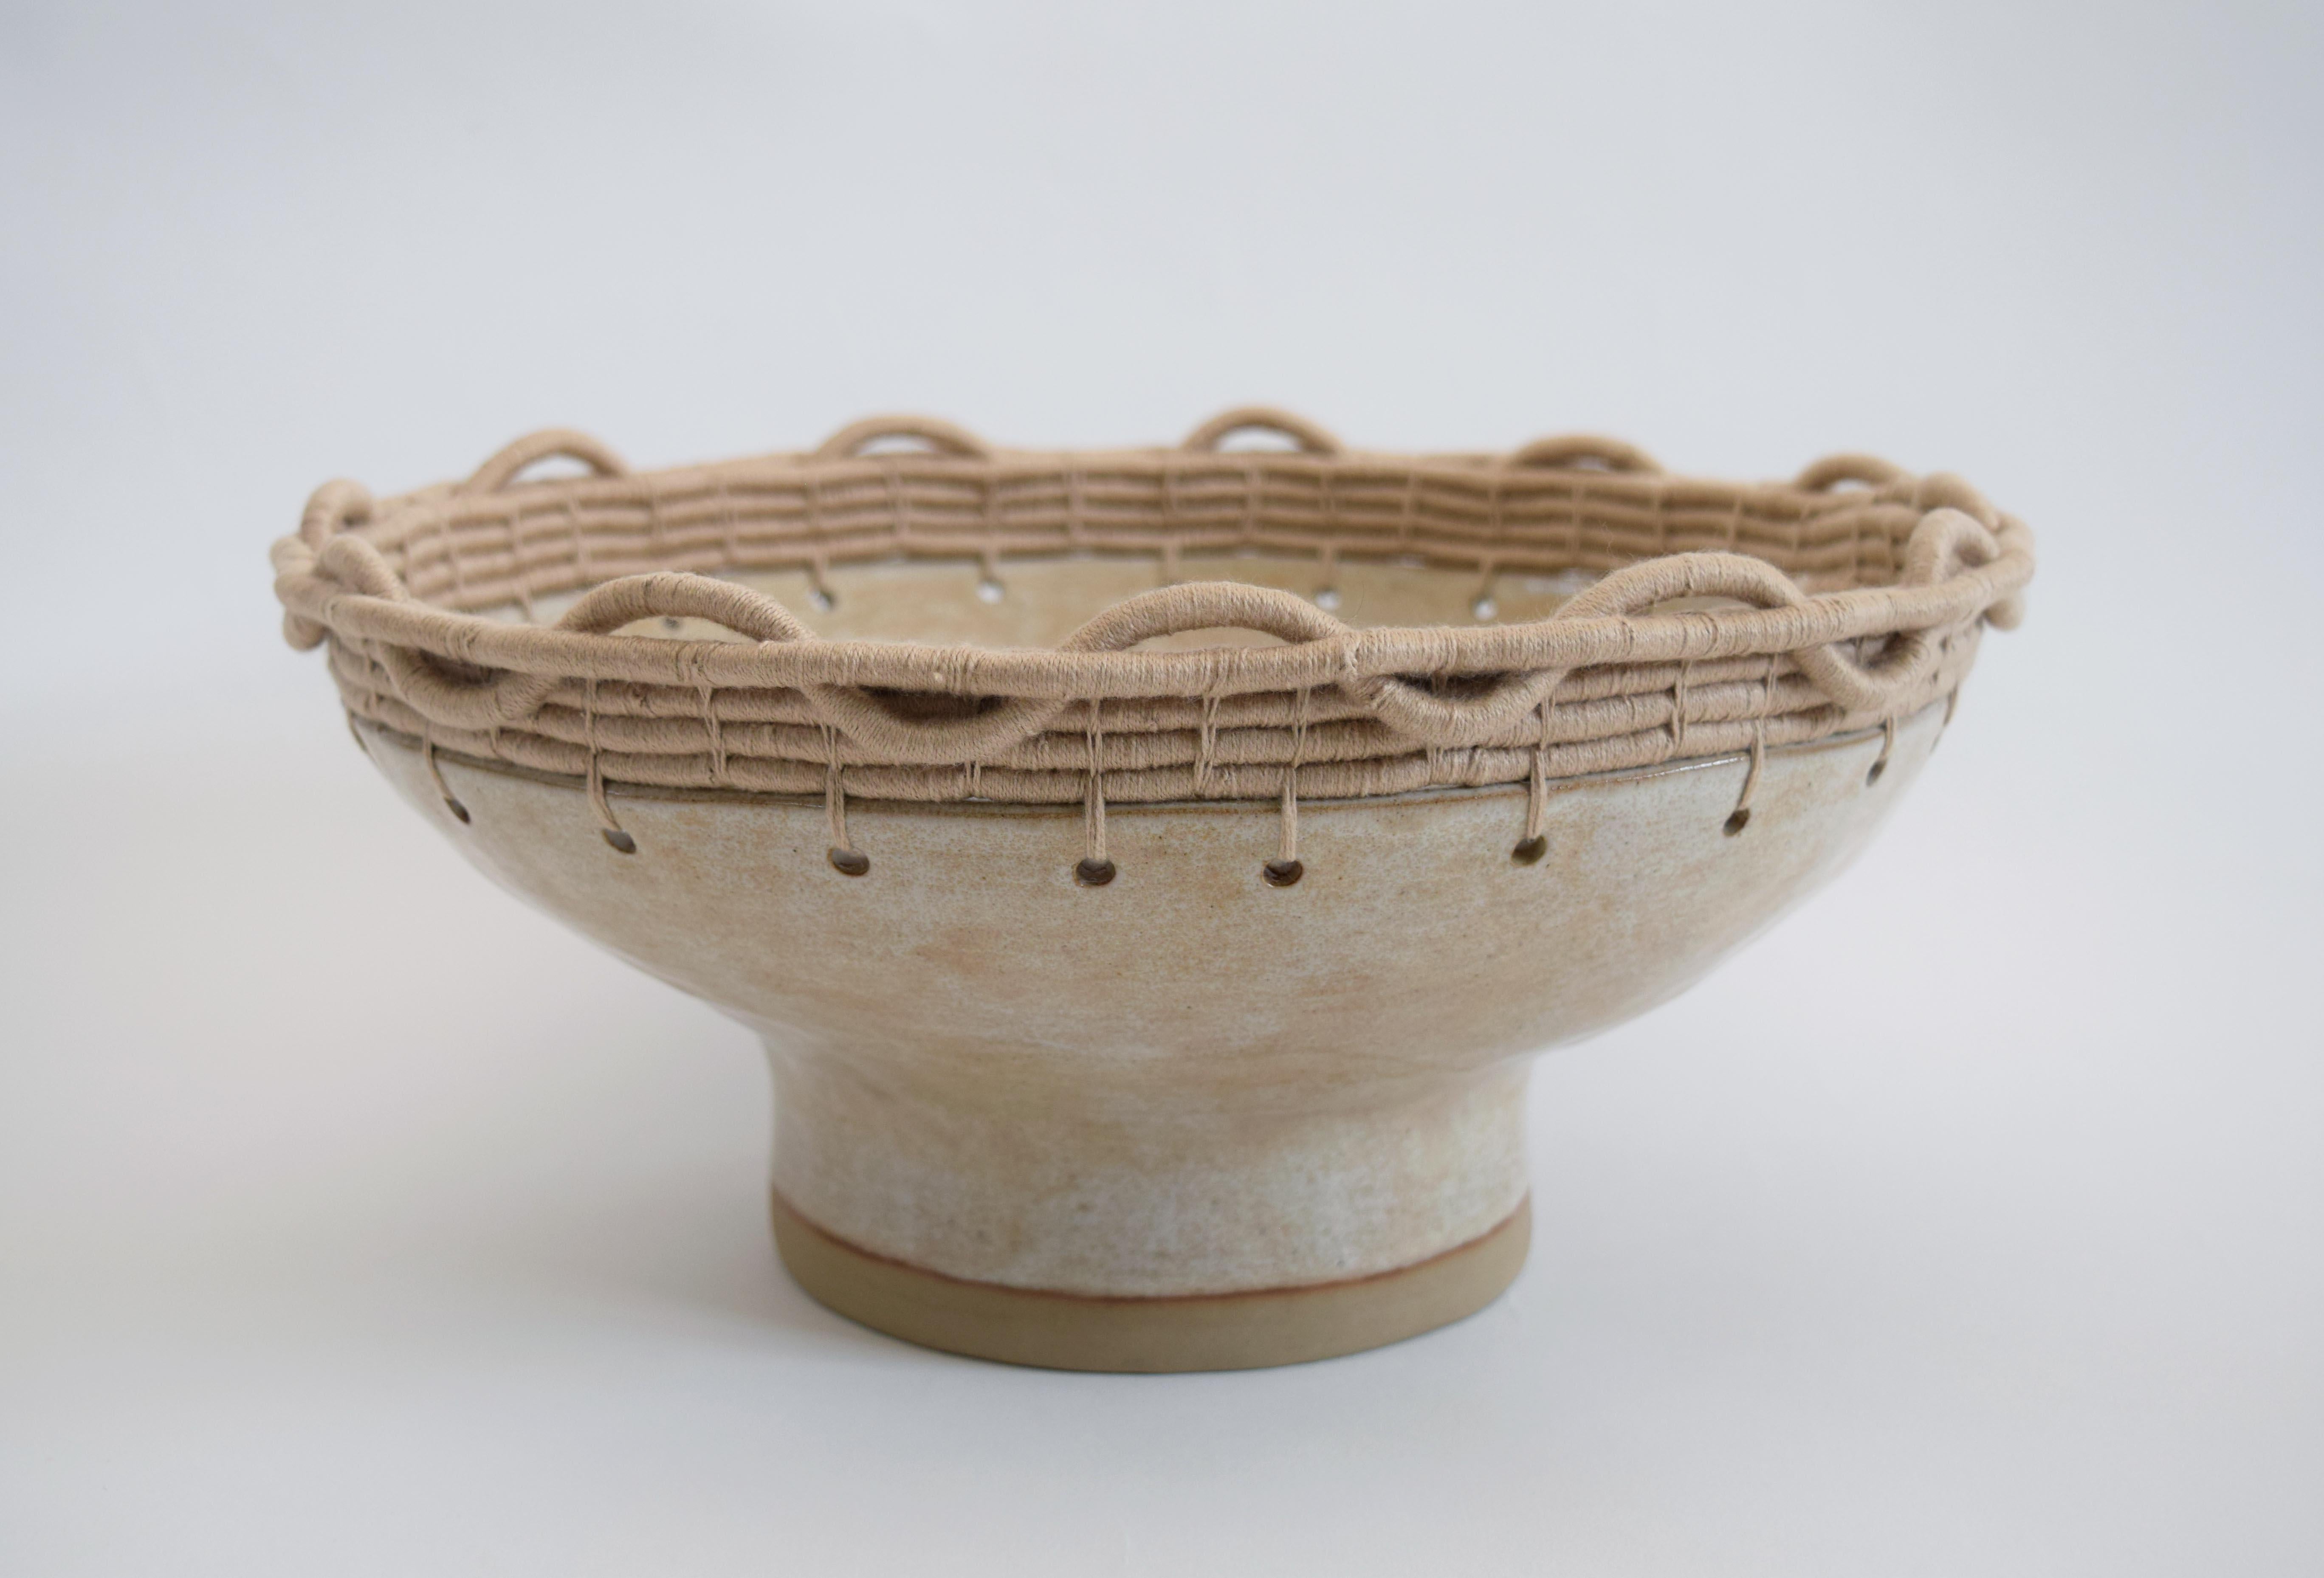 Decorative bowl #792 by Karen Gayle Tinney

Hand formed stoneware bowl with light tan glaze. Woven tan cotton edge detail. For decorative use only.

12.5